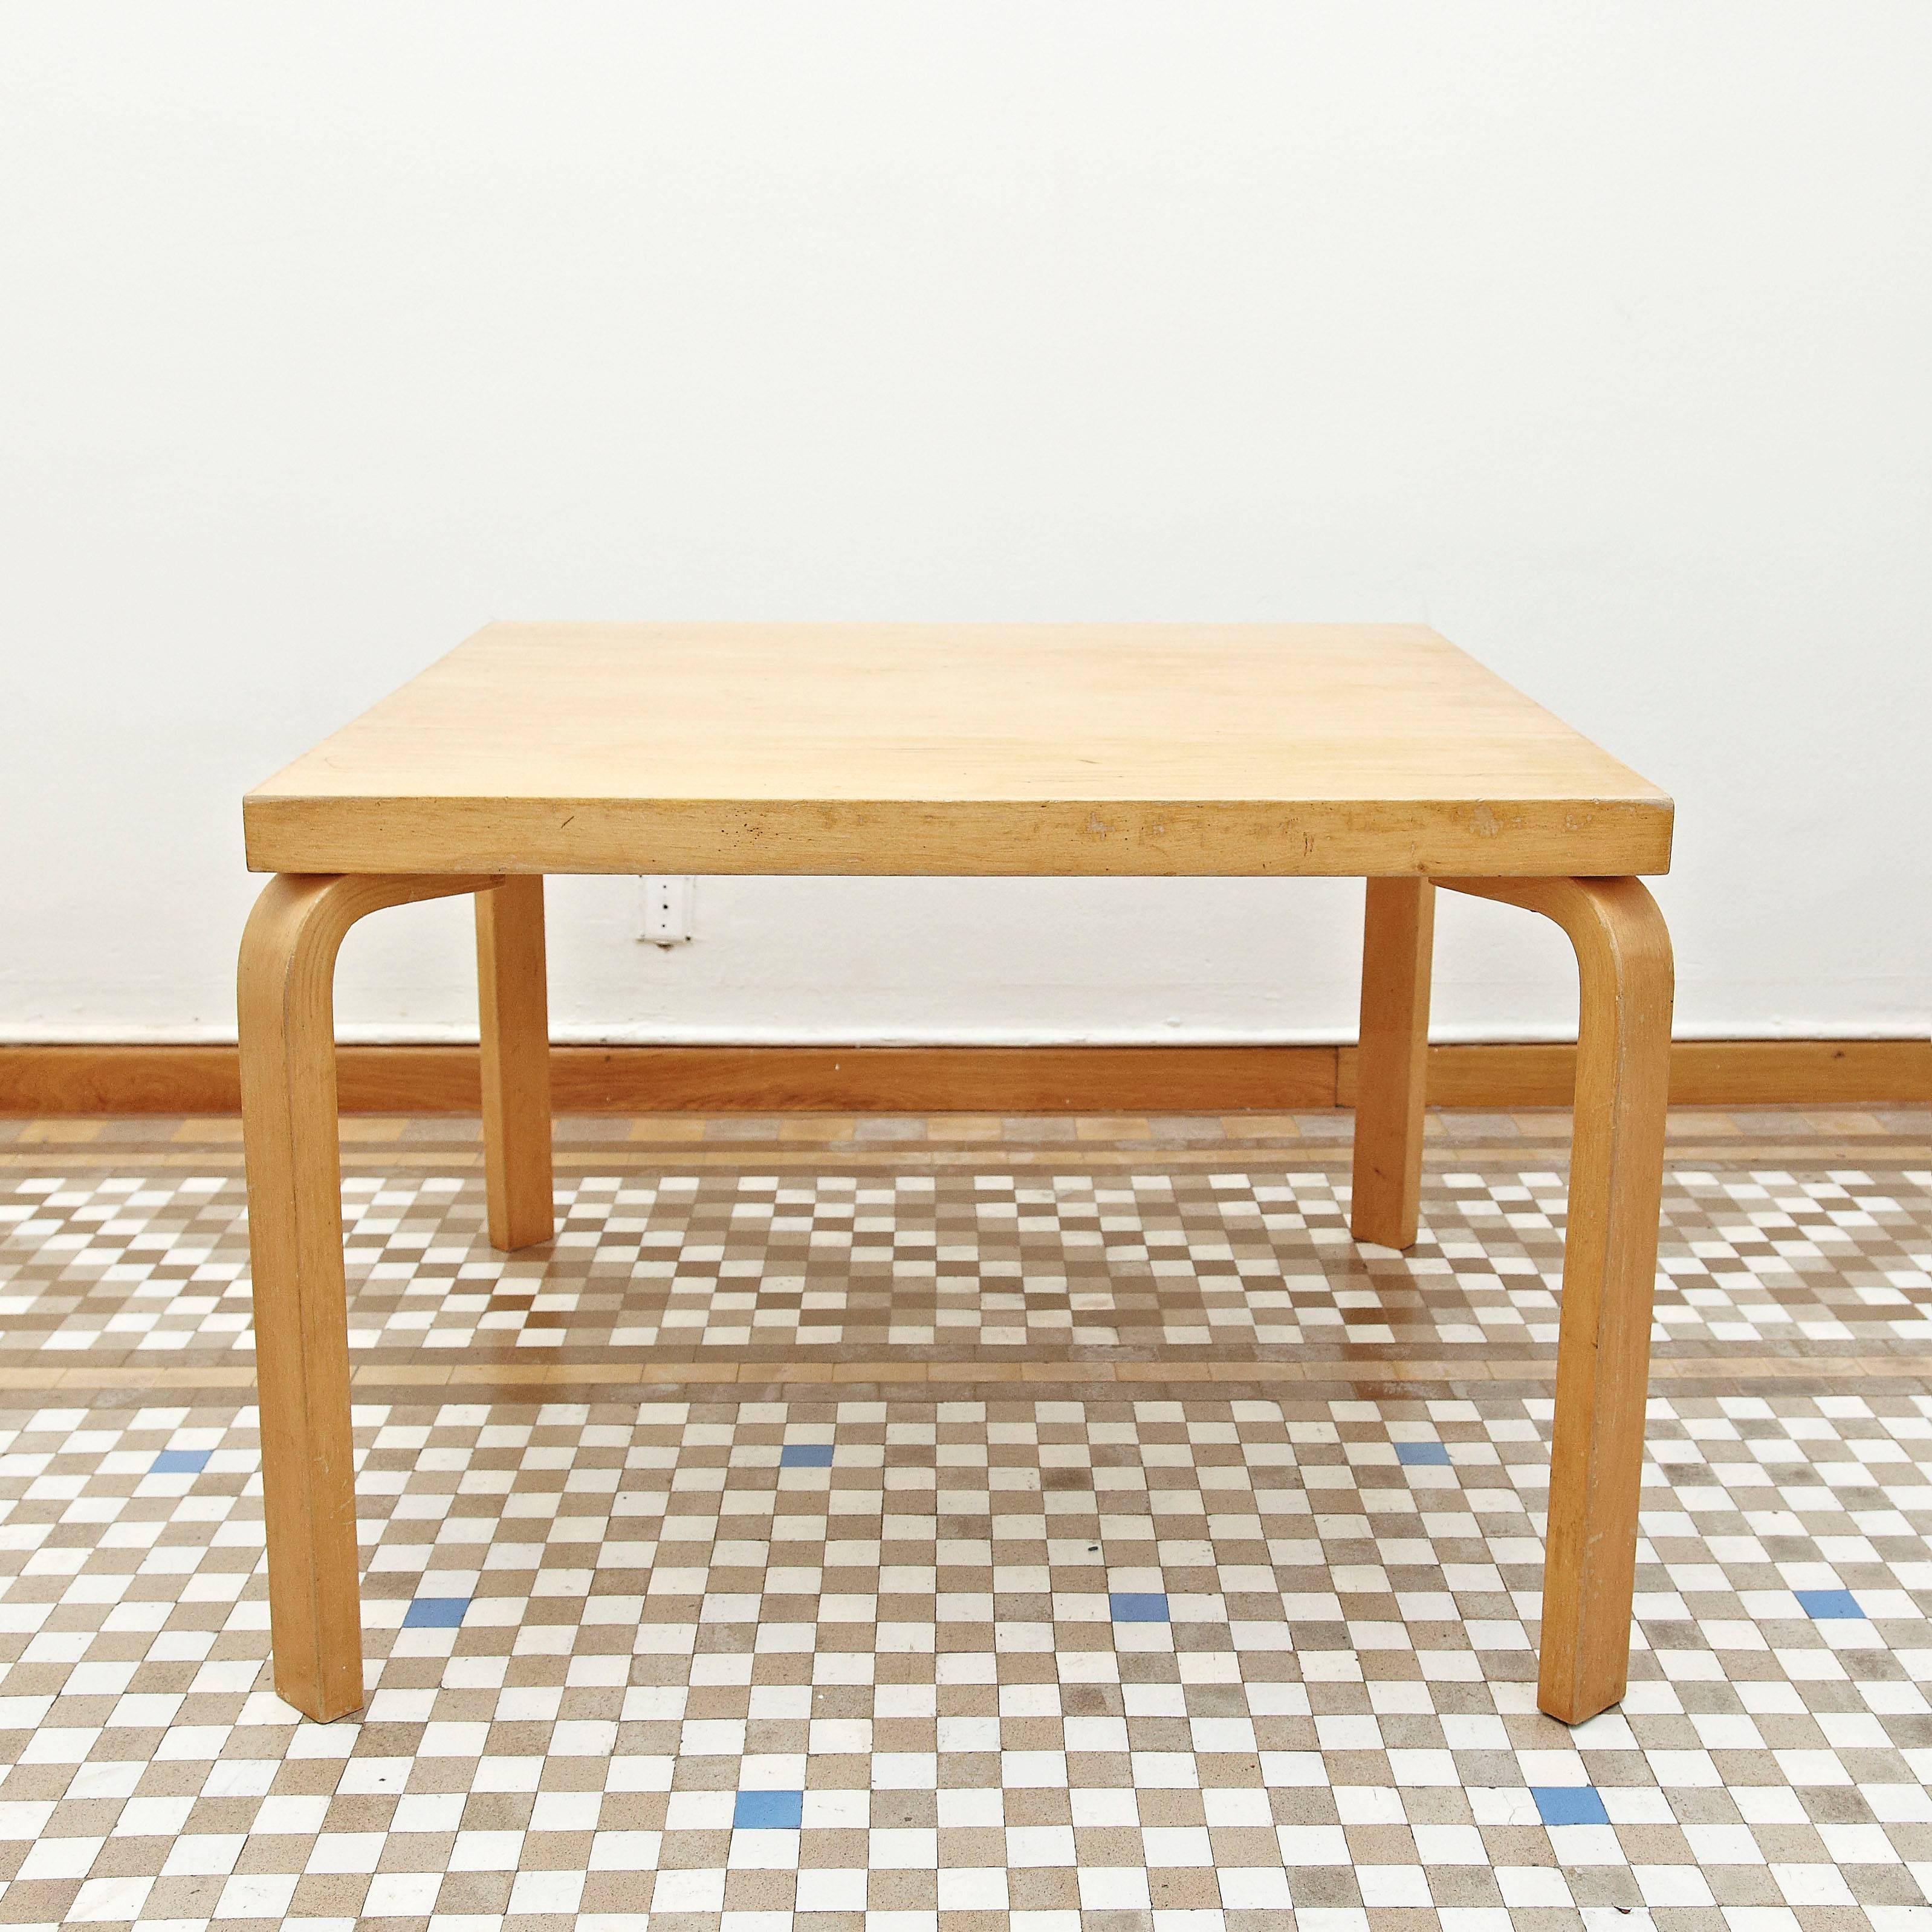 Dining table designed by Alvar Aalto, circa 1960.
Manufactured by Artek (Finland).
Wood legs and structure.

In great original condition, with minor wear consistent with age and use, preserving a beautiful patina.

Hugo Alvar Henrik Aalto